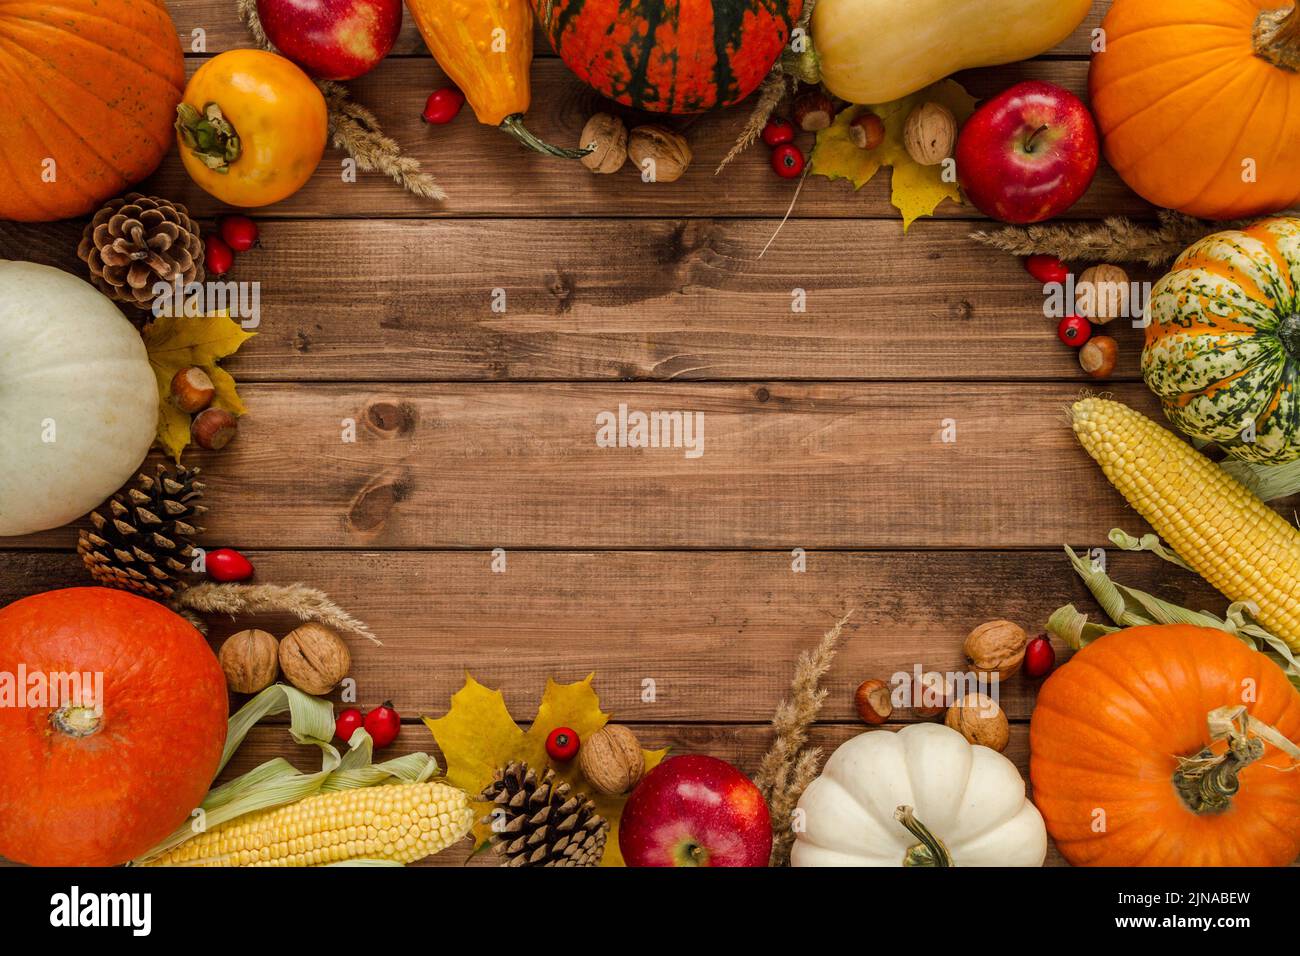 Variety of pumpkins, gourds, squash. Flat lay composition frame with walnuts, hazelnuts, apples, cones, rosehips, kaki, corn. Copy space on wooden bg. Stock Photo